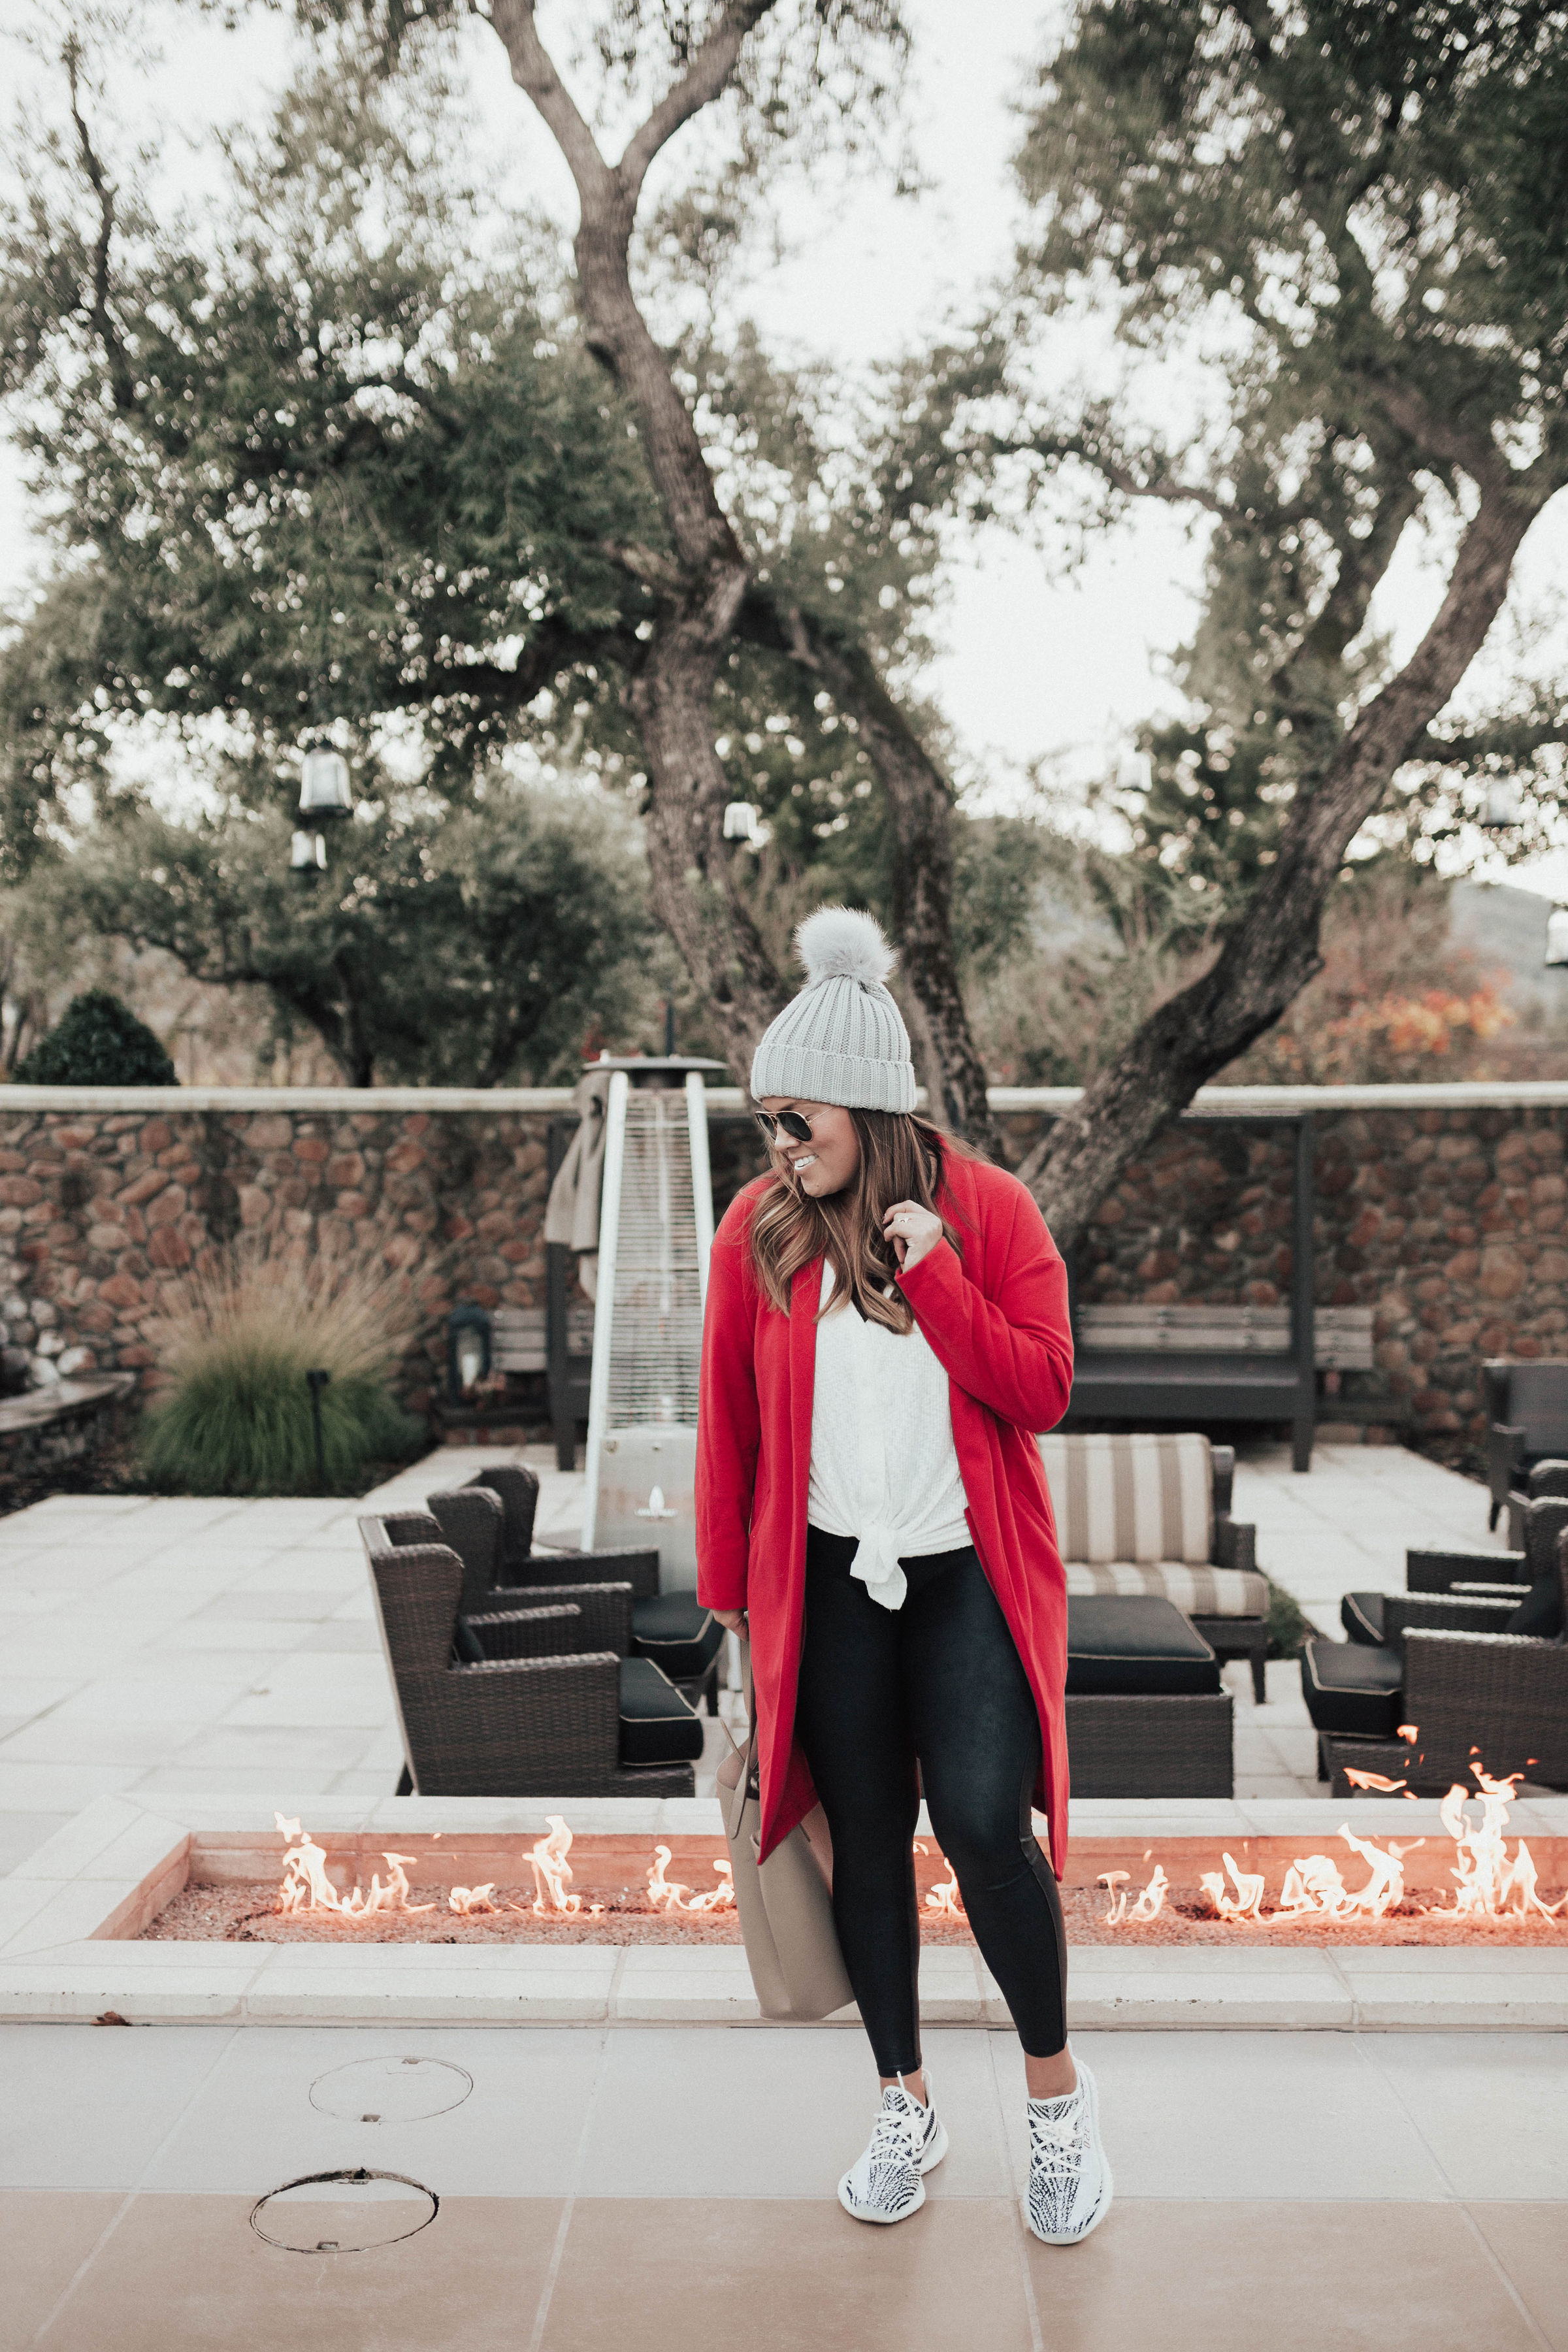 San Francisco blogger Ashley Zeal from Two Peas in a Prada shares her travel tips for 24 hours in Yountville. Including where to stay, eat and what to do. 